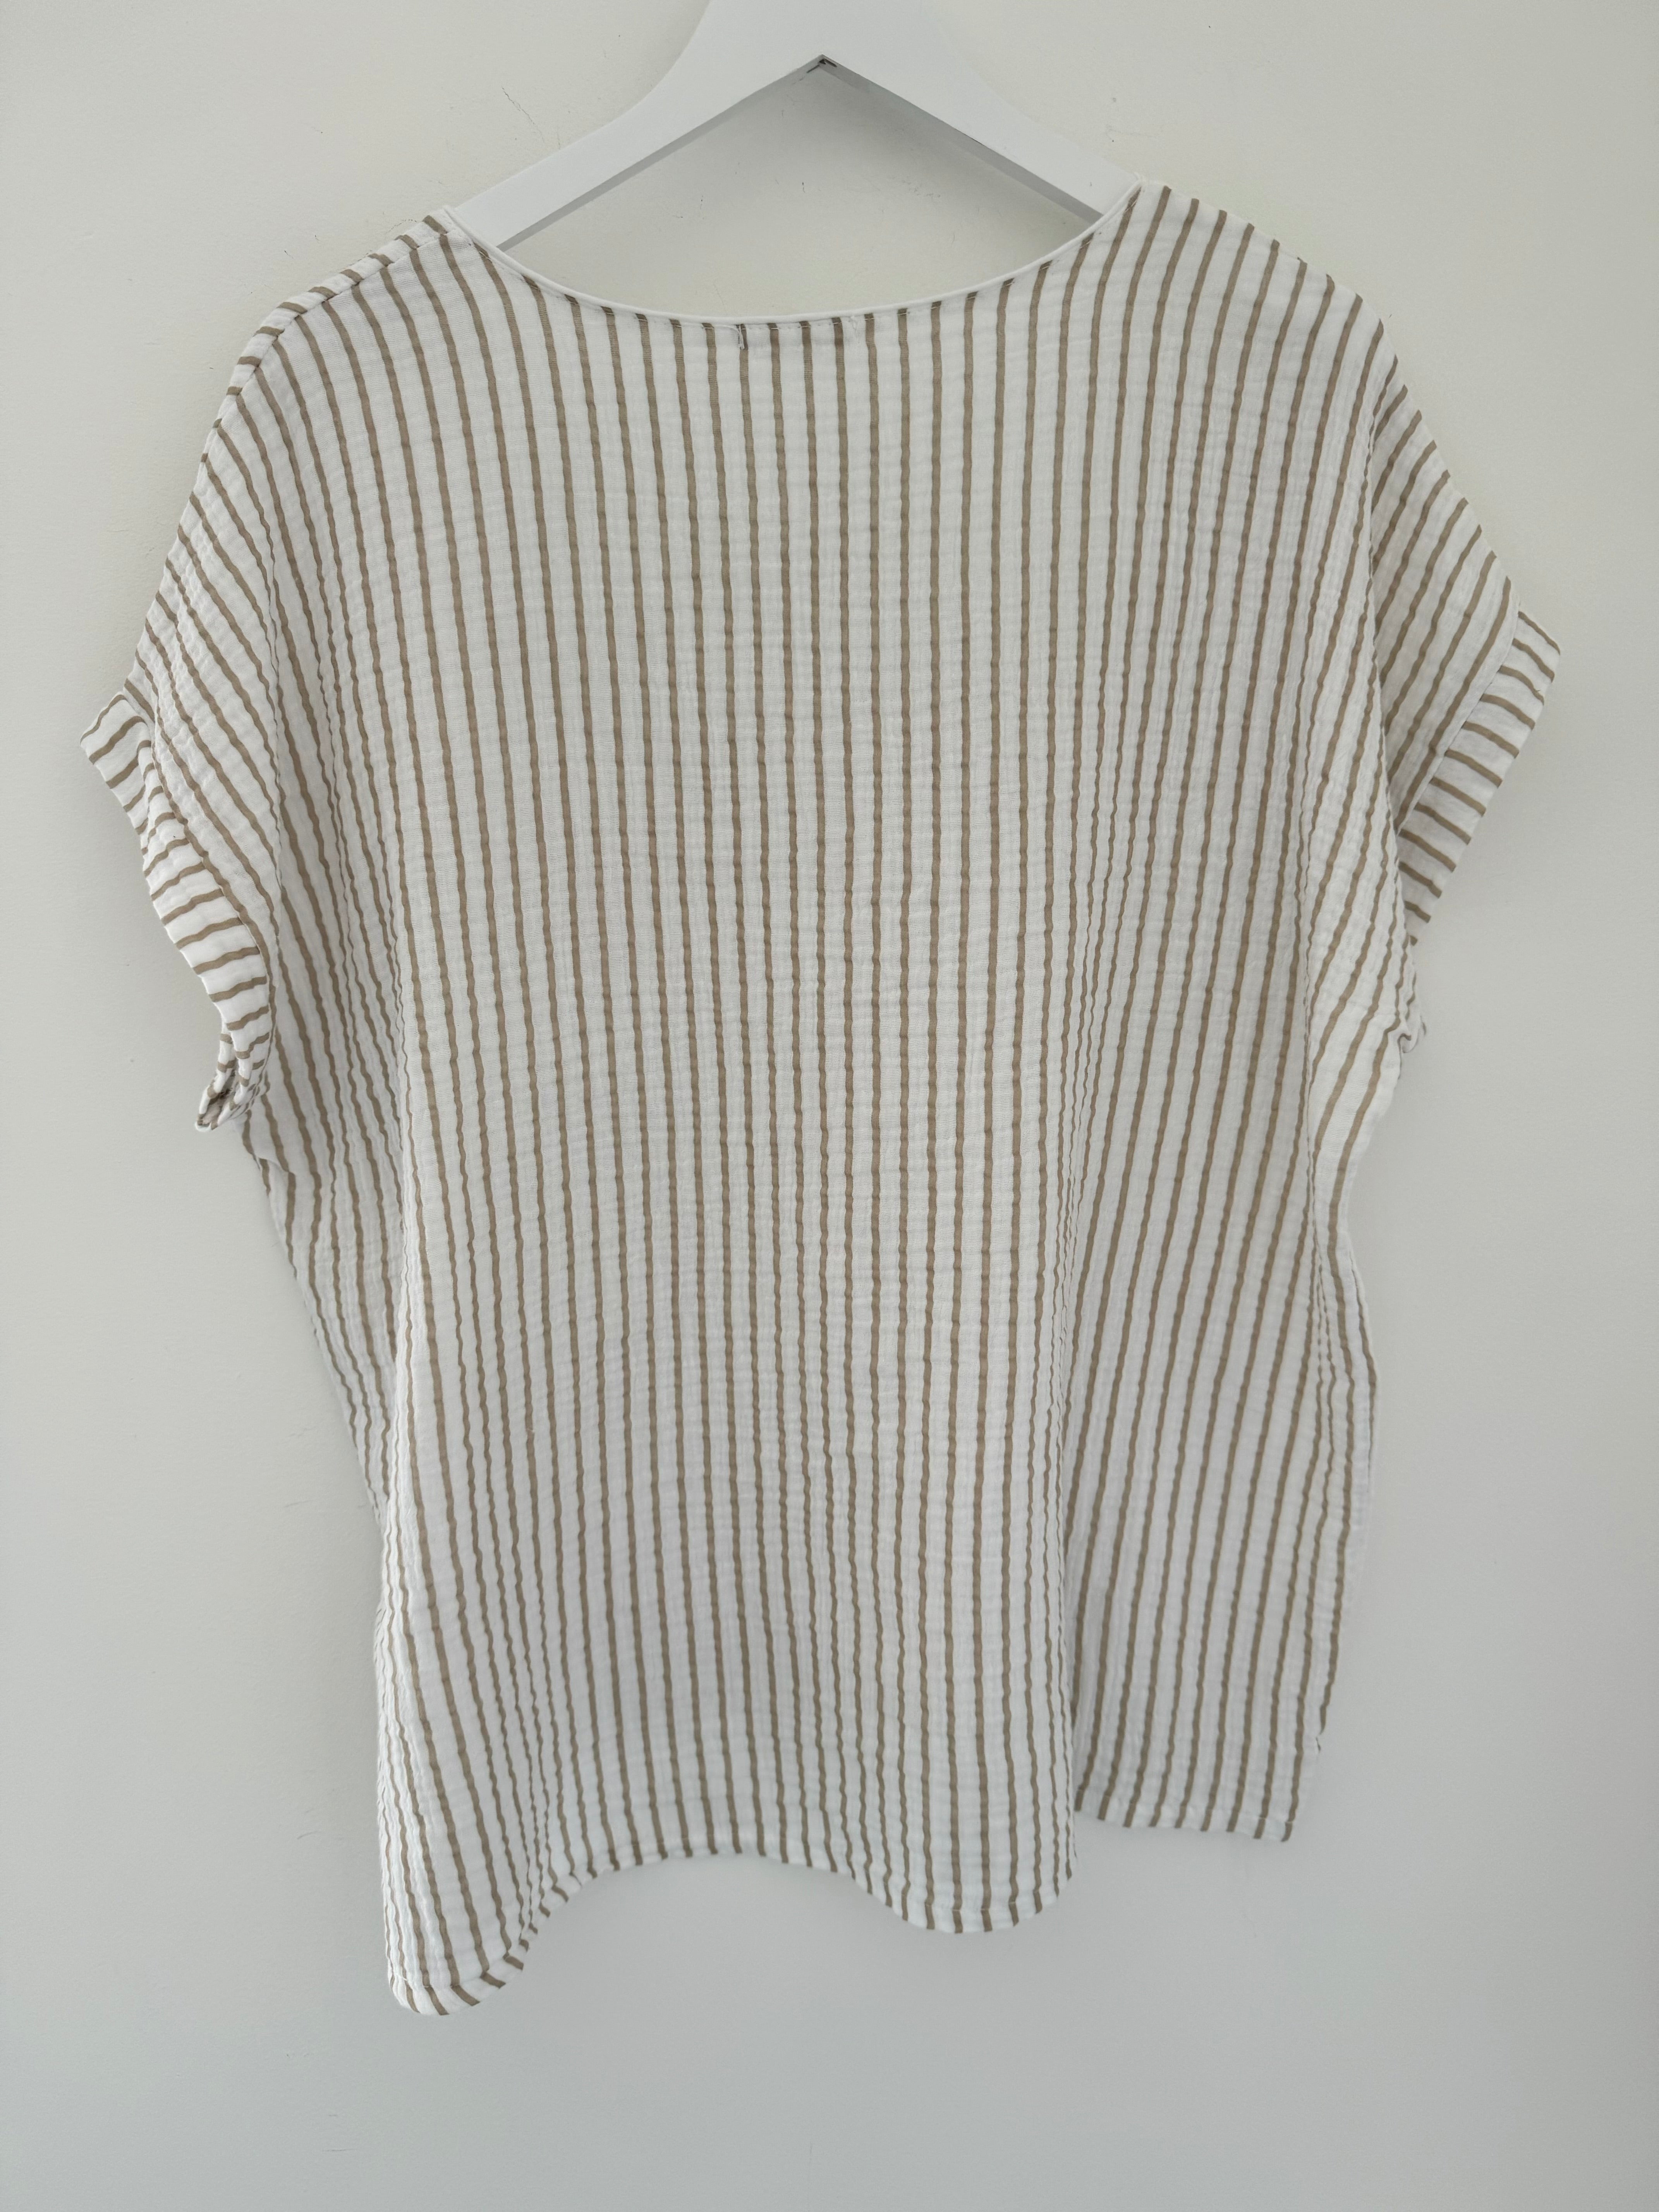 Cheesecloth Stripe Top in Stone & White